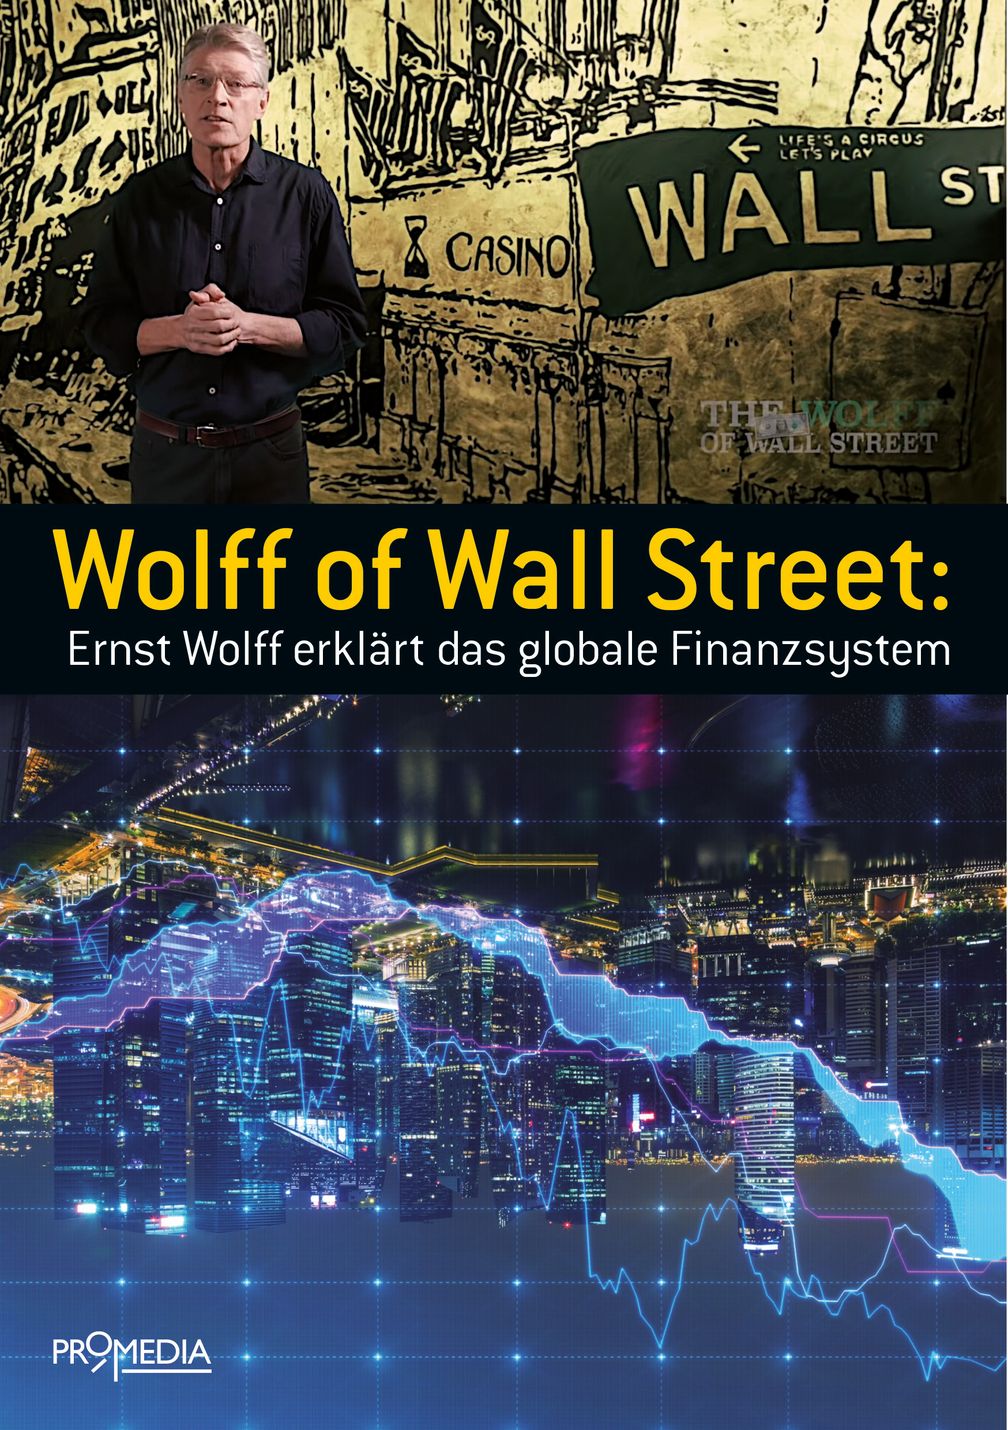 Wolff of Wall Street Cover